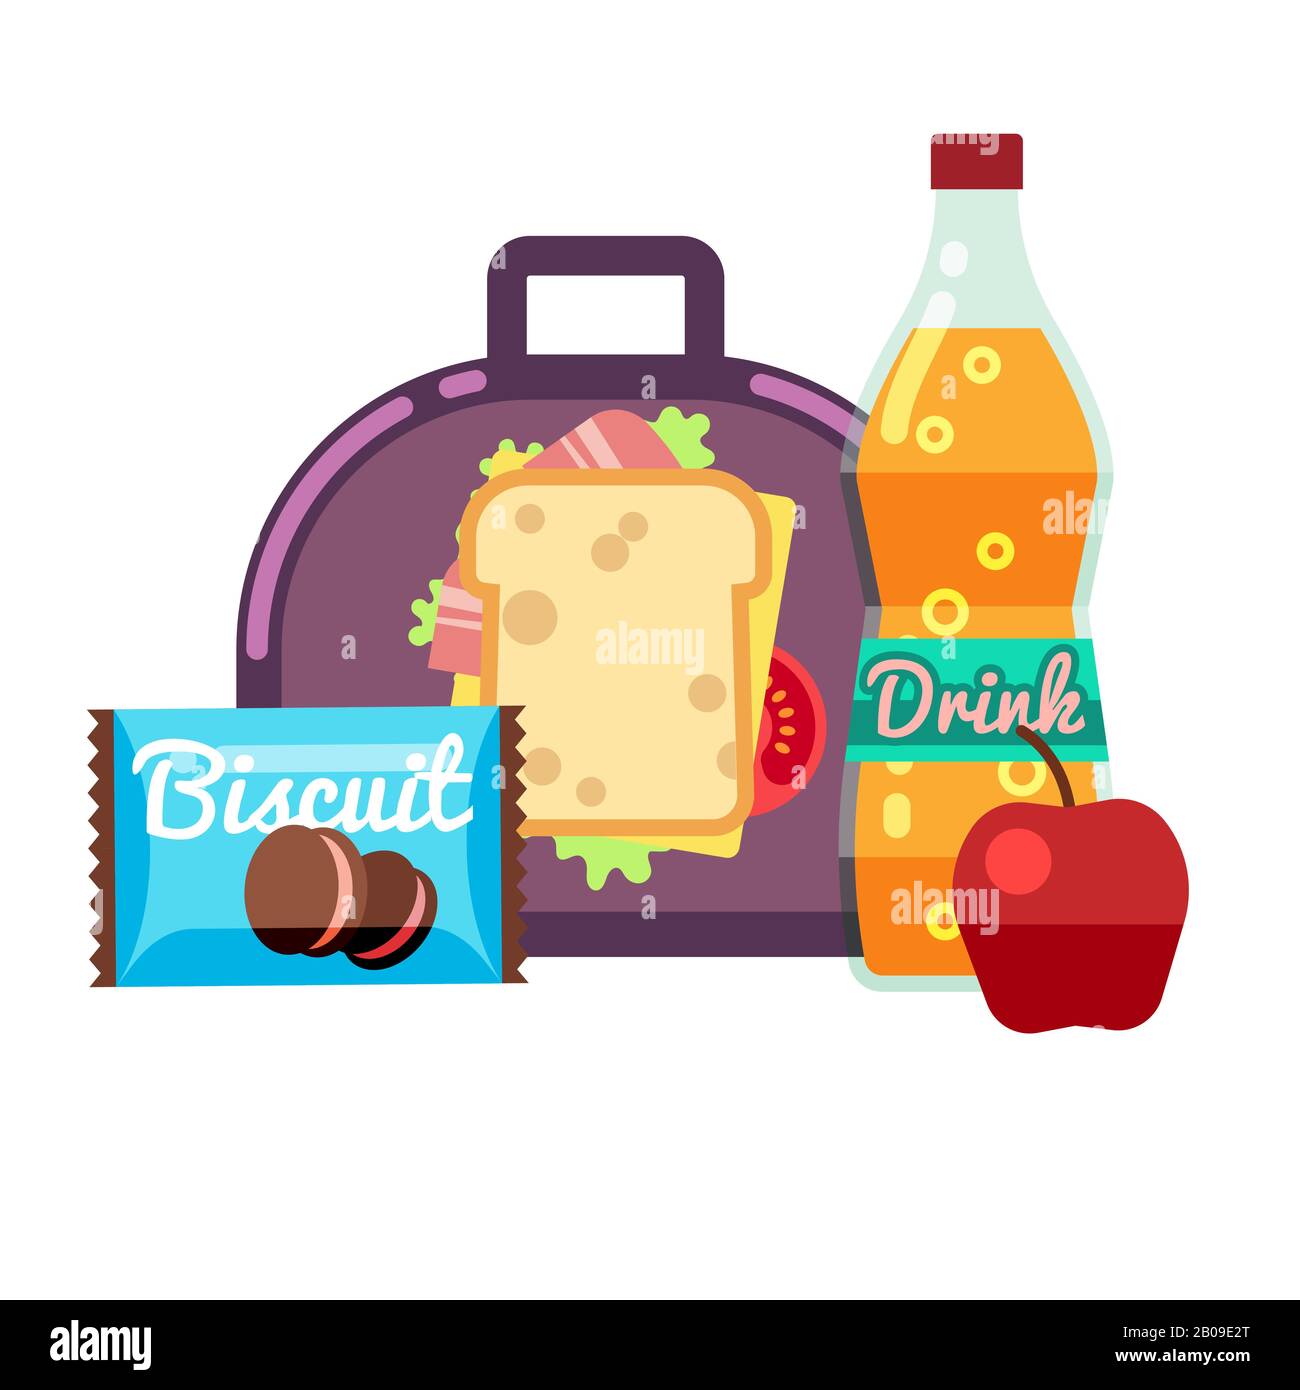 https://c8.alamy.com/comp/2B09E2T/kids-lunch-box-bag-with-snacks-meal-and-beverages-vector-stock-lunchbox-sandwich-drink-with-apple-fruit-lunch-for-school-illustration-2B09E2T.jpg